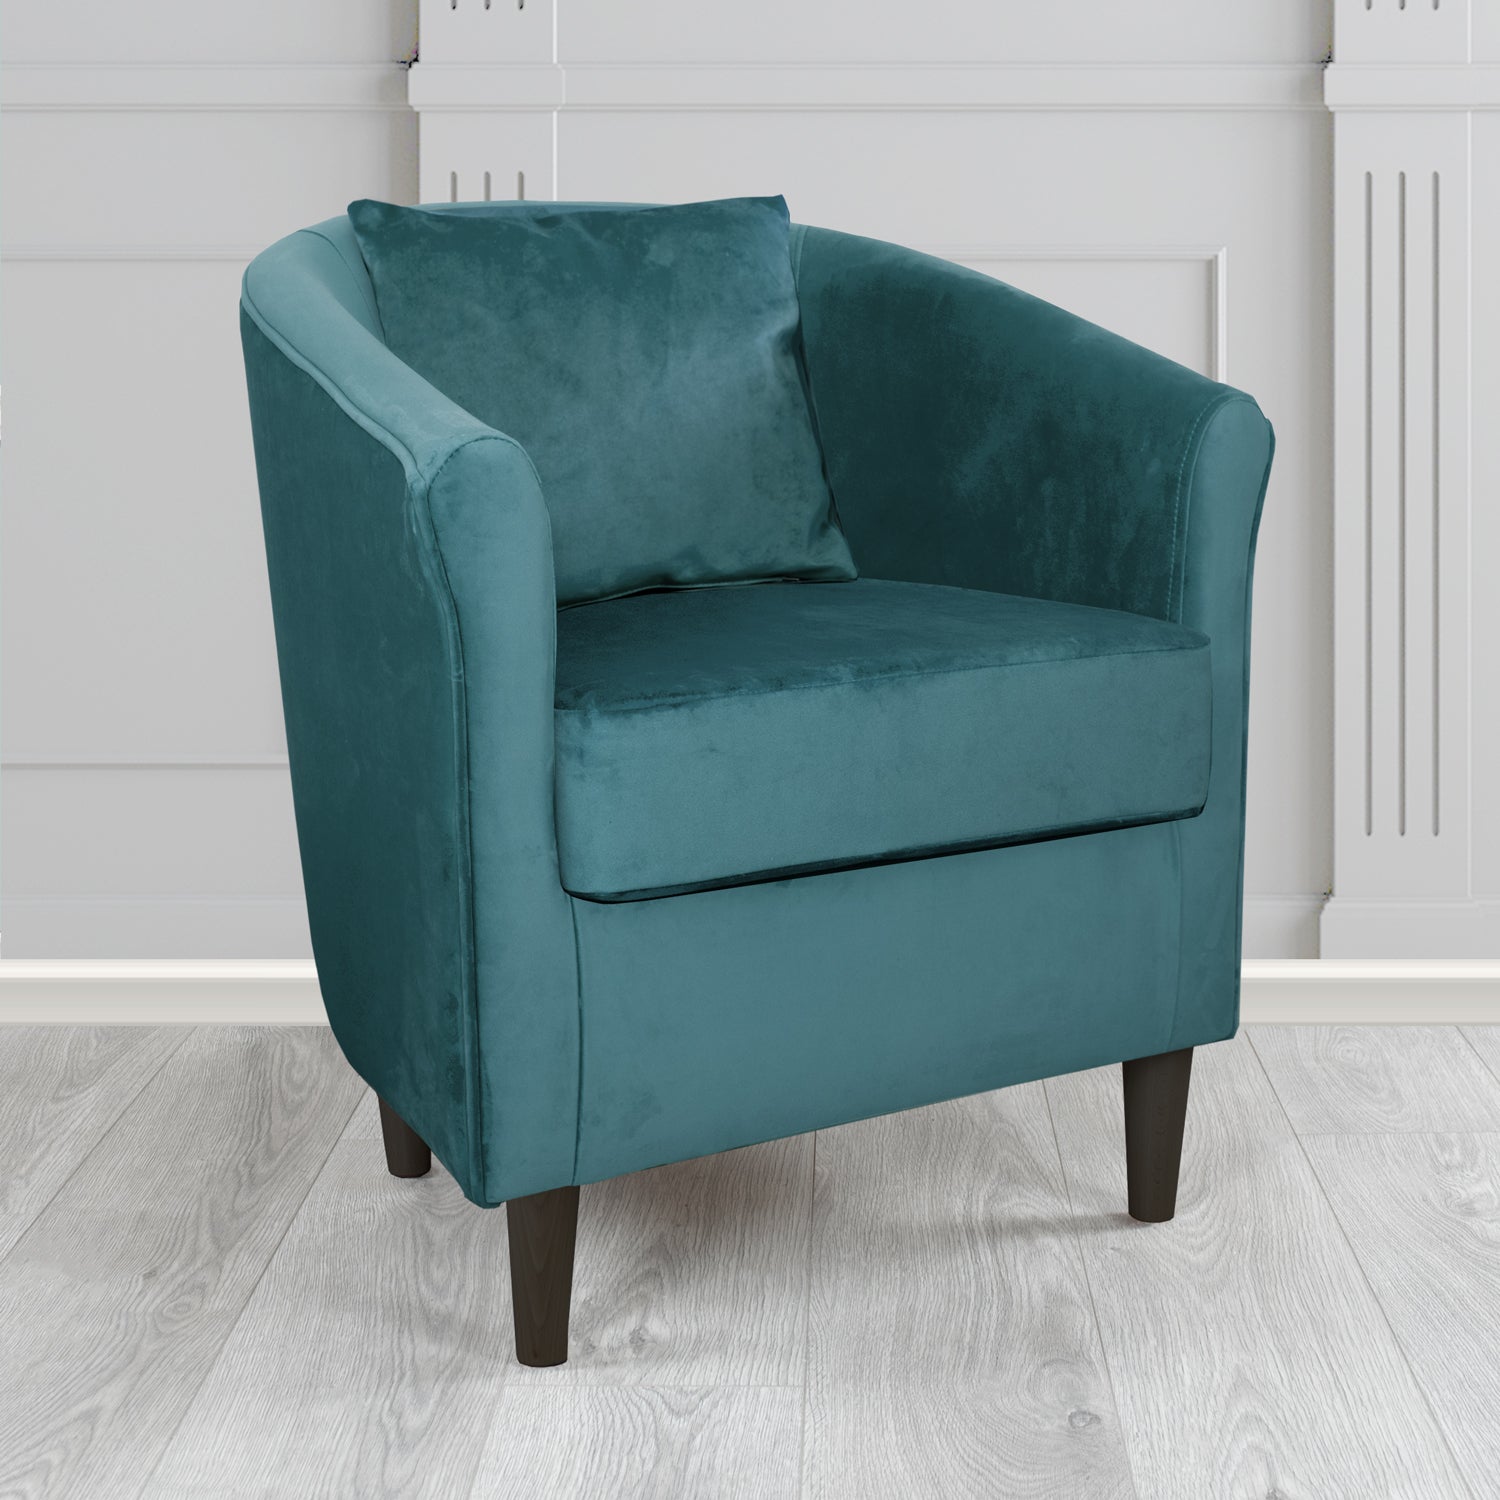 Express St Tropez Monaco Teal Plush Velvet Fabric Tub Chair with Scatter Cushion (6604889980970)